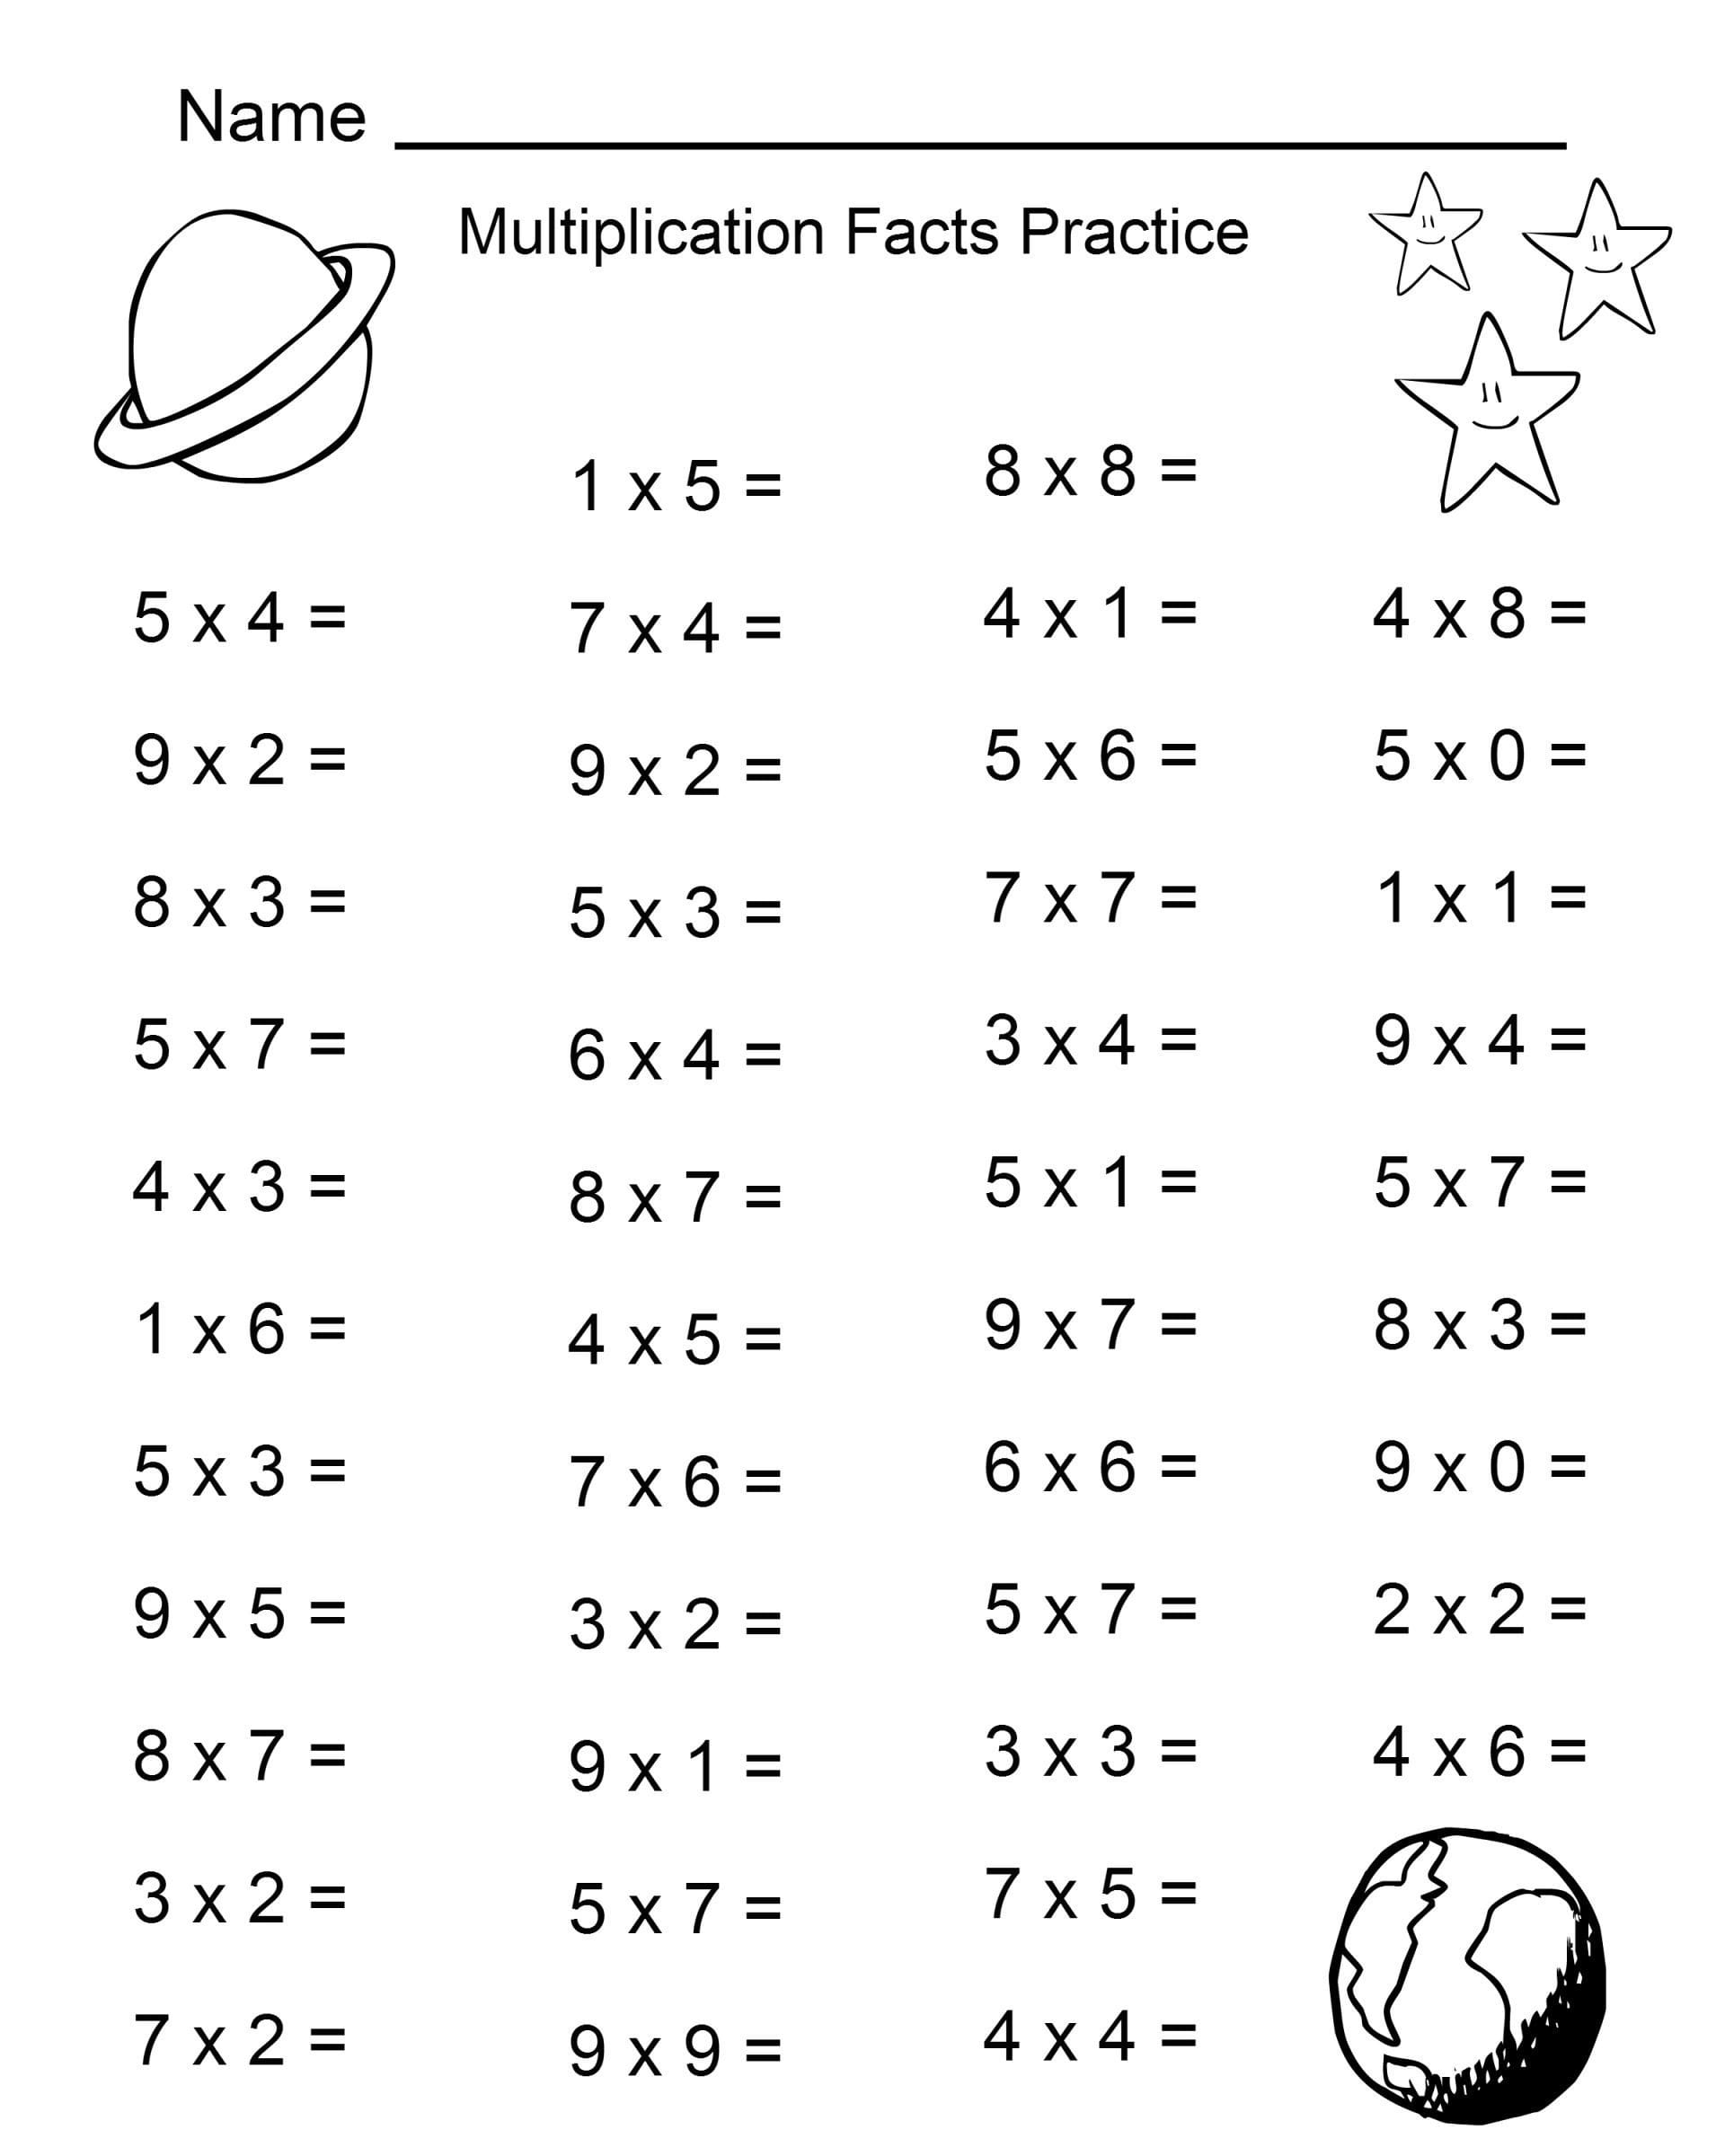 Bunch Ideas Of Staar Testing Math Worksheets Texas Test Practice The For Texas Staar Test Practice Worksheets